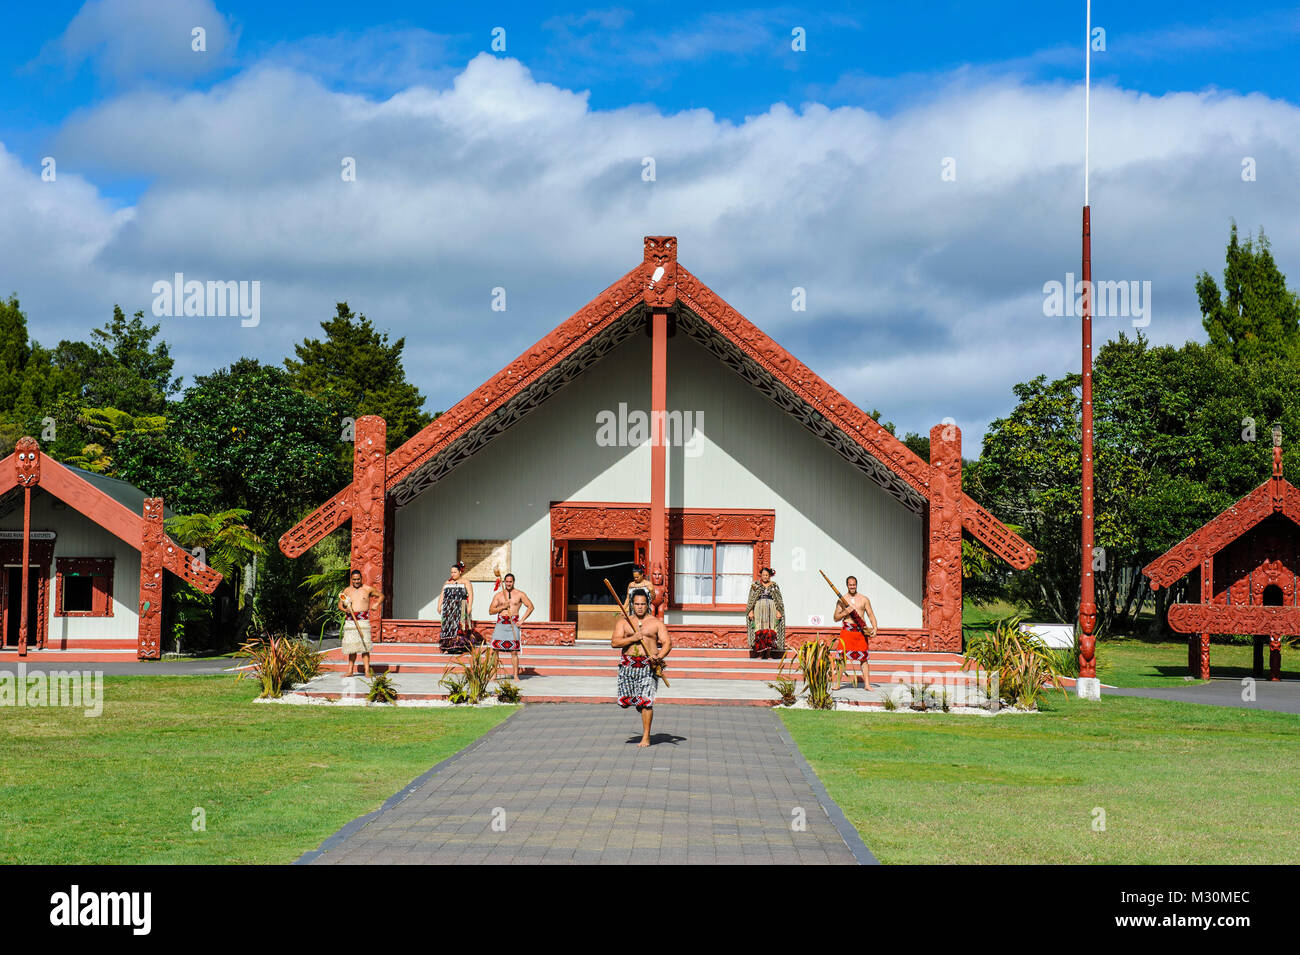 Traditional dressed Maoris in front of the Te Puia Maori Cultural Center, Roturura, North Island, New Zealand Stock Photo